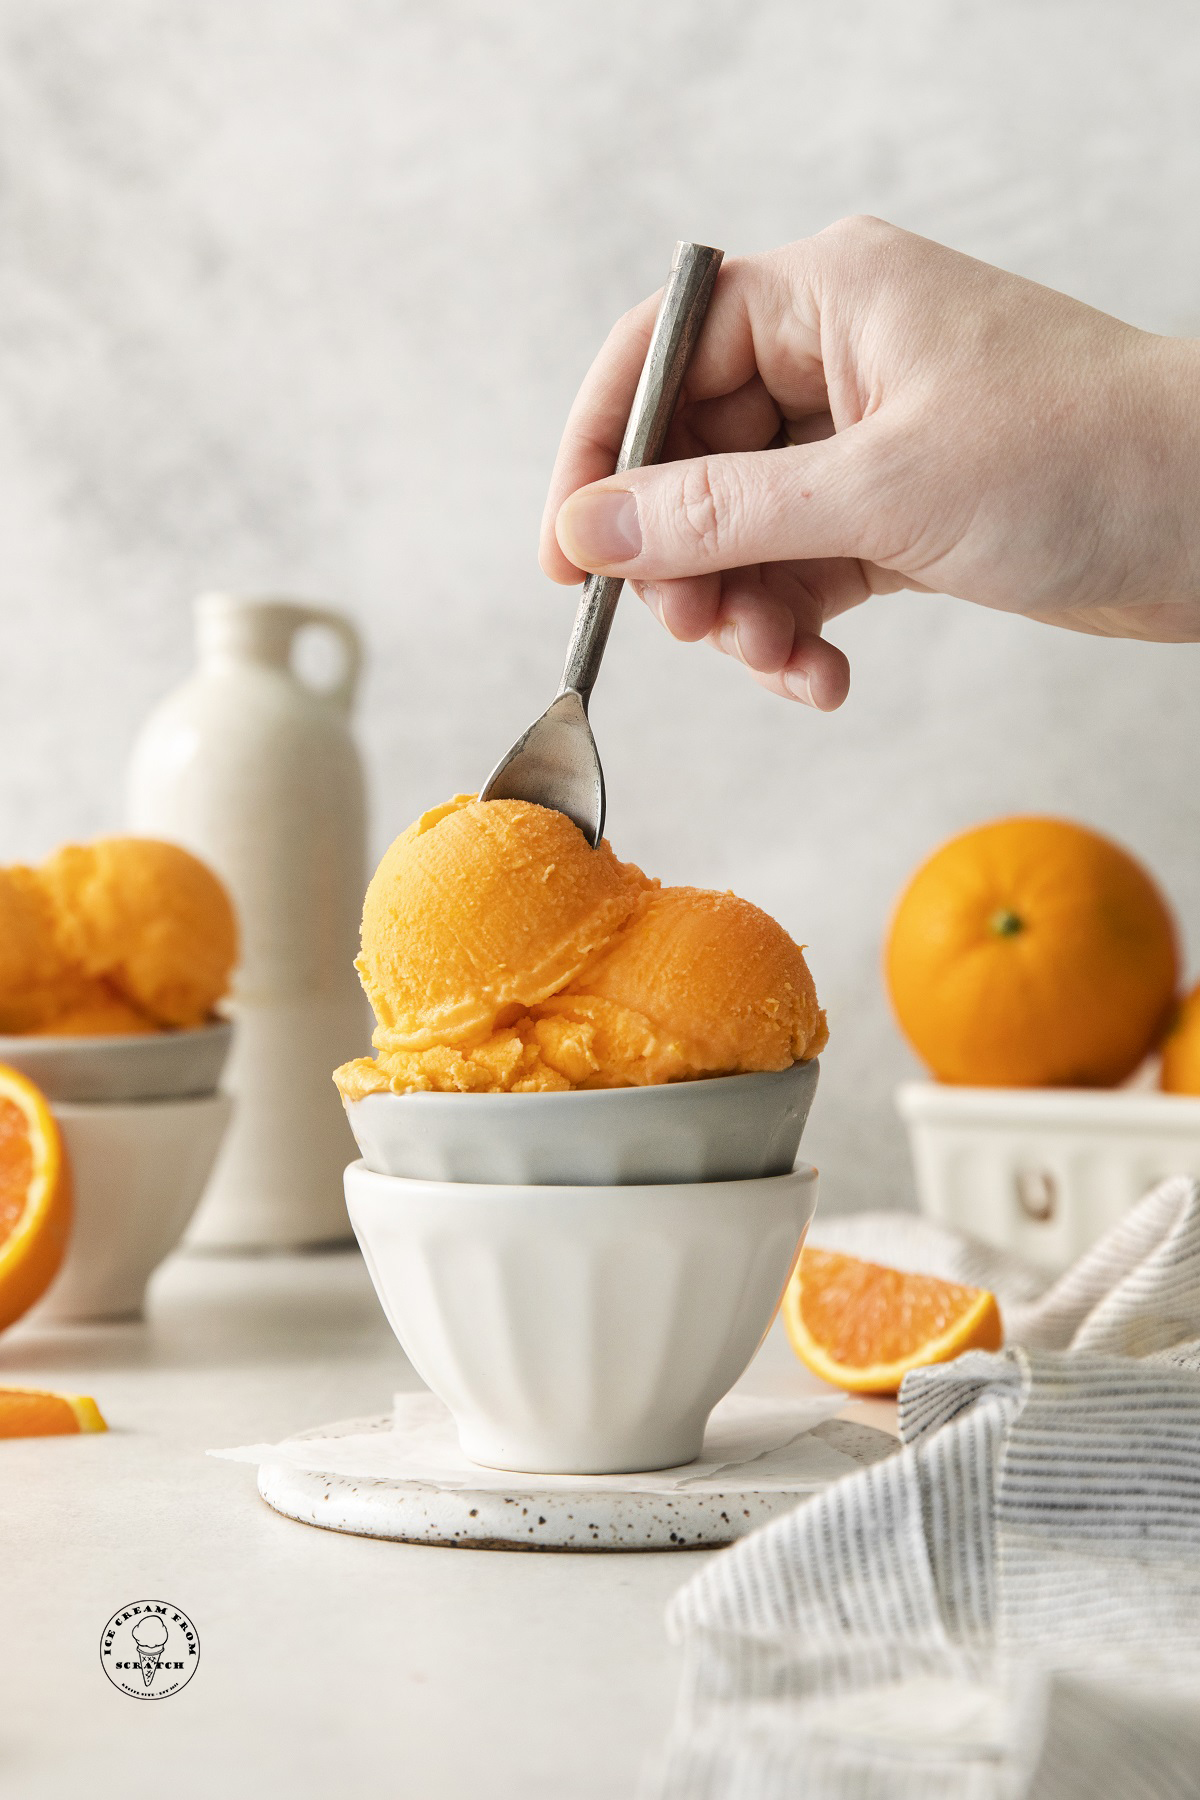 two small bowls stacked, filled with scoops of homemade orange sherbet. A hand is eating it with a small spoon.